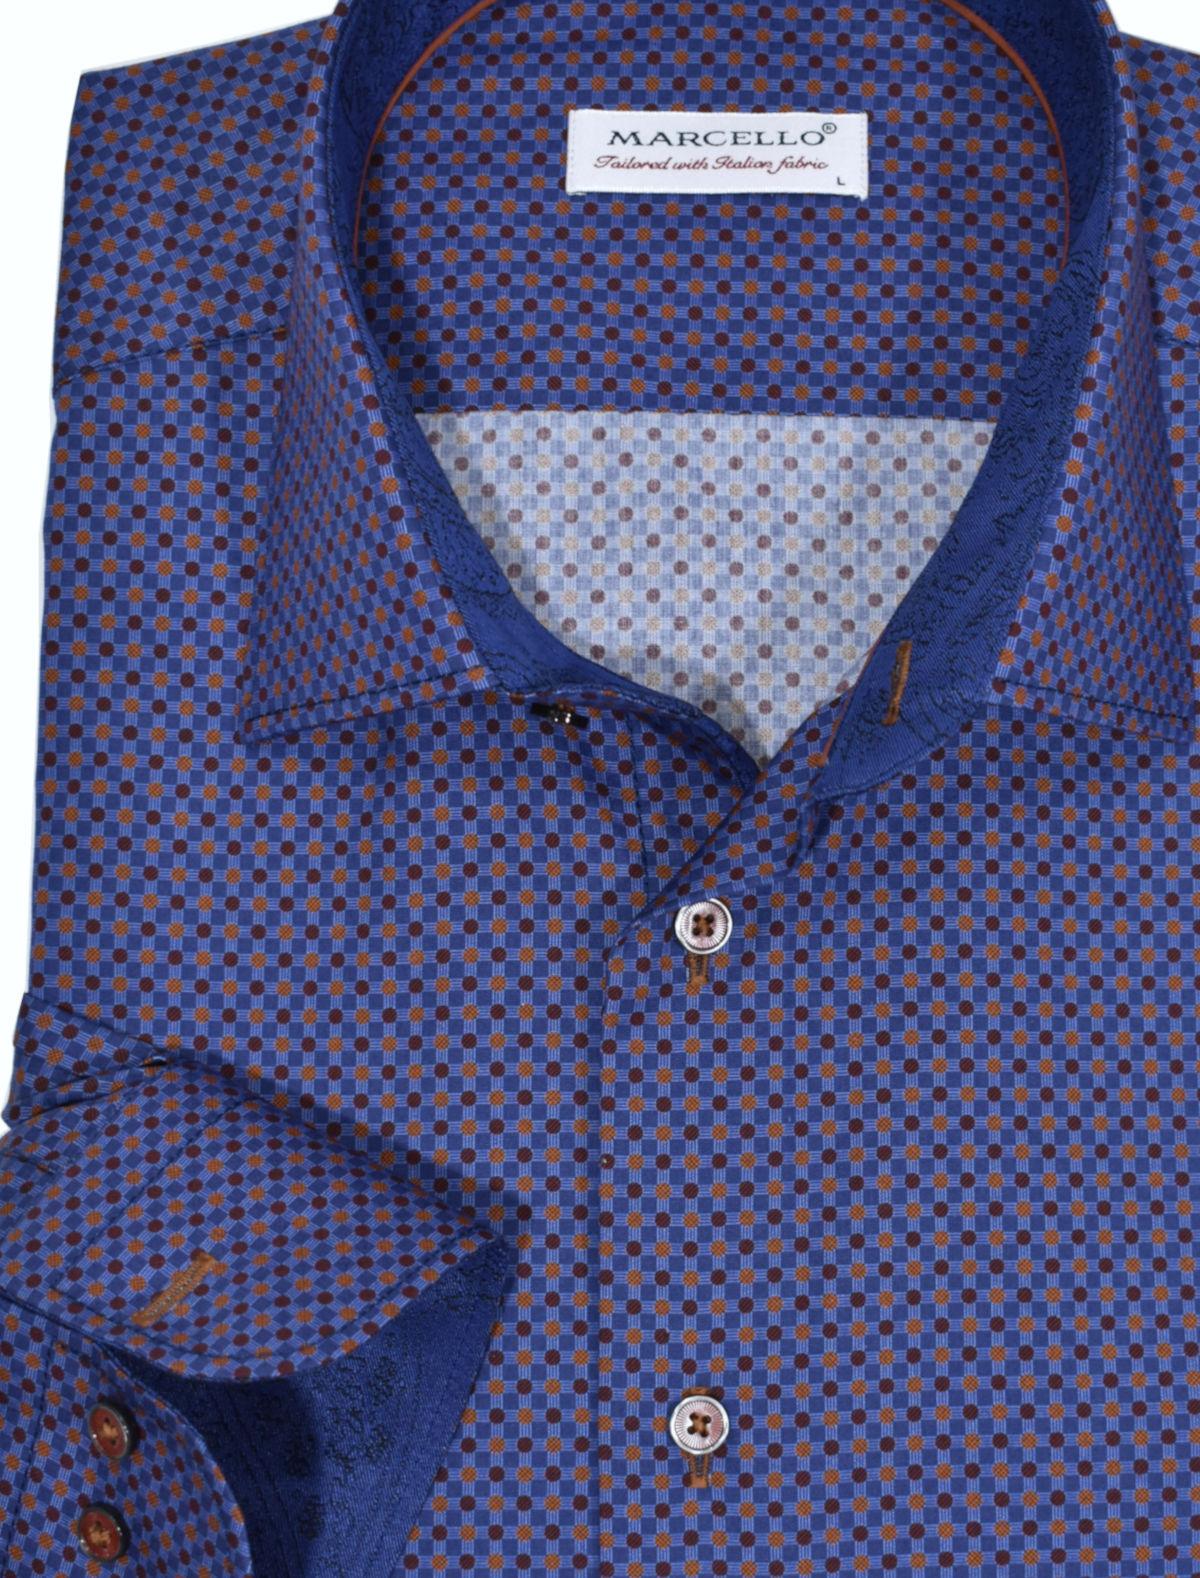 An outstanding combination of a classic window pane plaid pattern married with a colored dot pattern in complimentary colors.  The result is a sharp sport shirt perfect for dress or casual events.  Soft cotton sateen feels great on. Custom matched buttons and contrast stitch detailing. Matched trim fabric and contrast piping adds fashion style. Medium spread collar. Classic shaped fit, perfect for a medium build. Shirt by Marcello Sport.